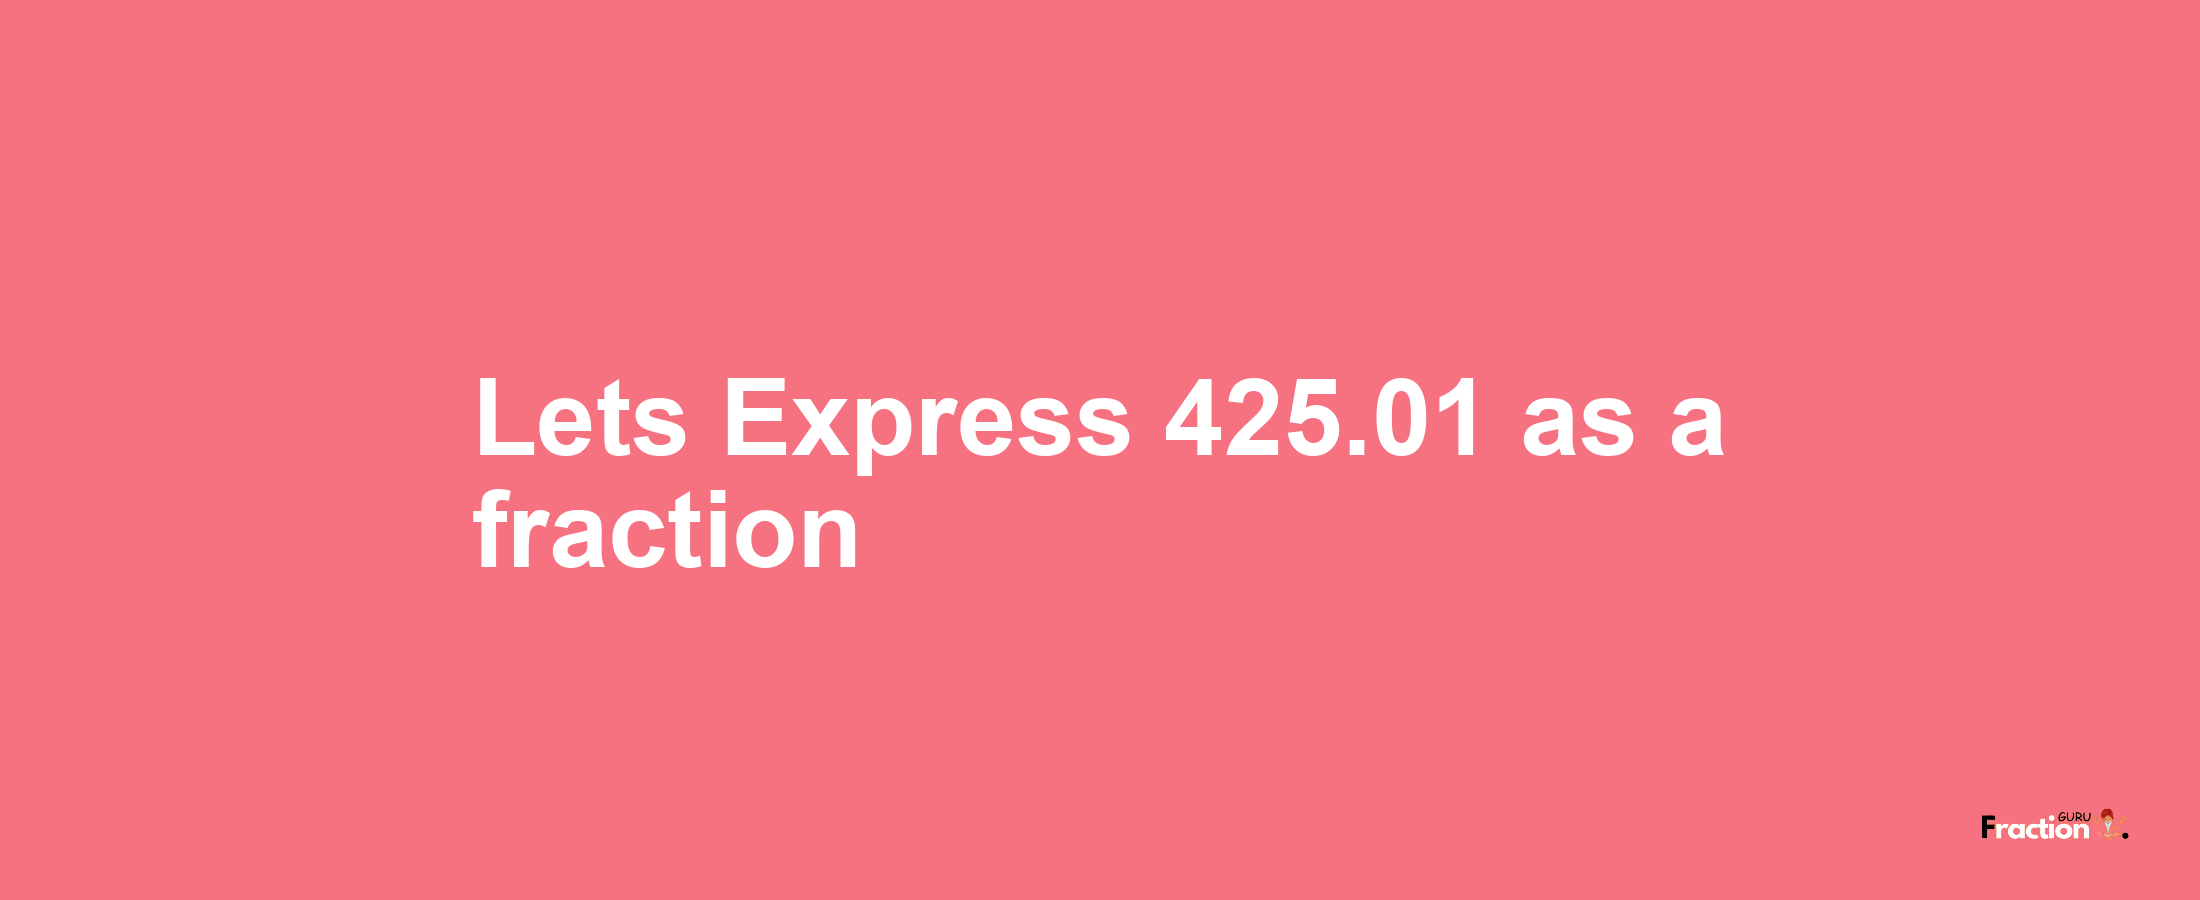 Lets Express 425.01 as afraction